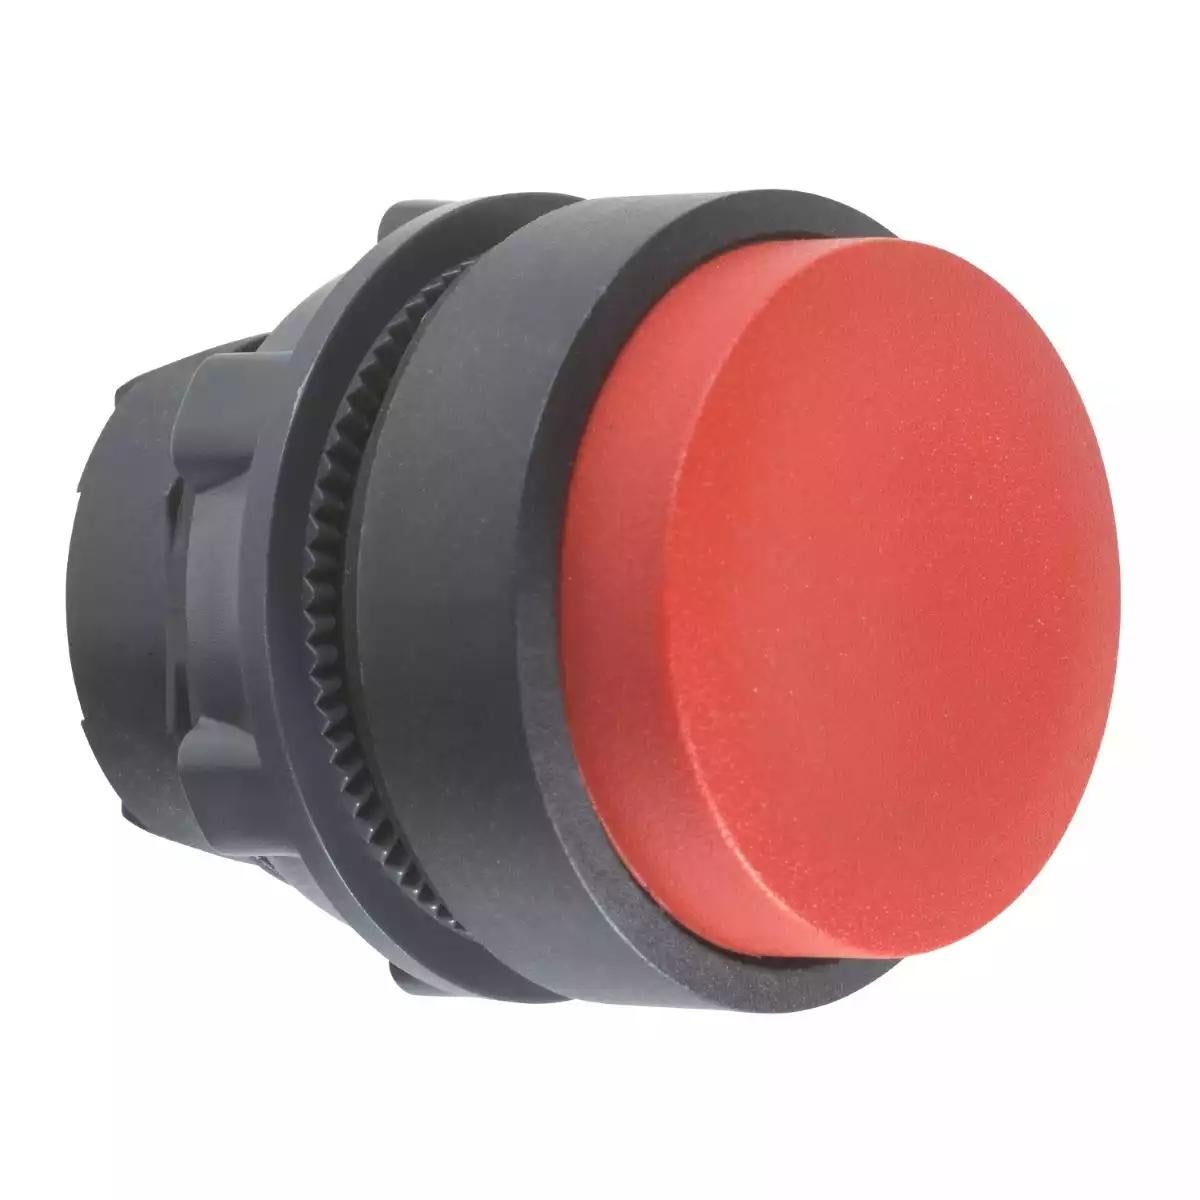 Head for non illuminated push button, Harmony XB5, XB4, red projecting pushbutton Ø22 mm unmarked